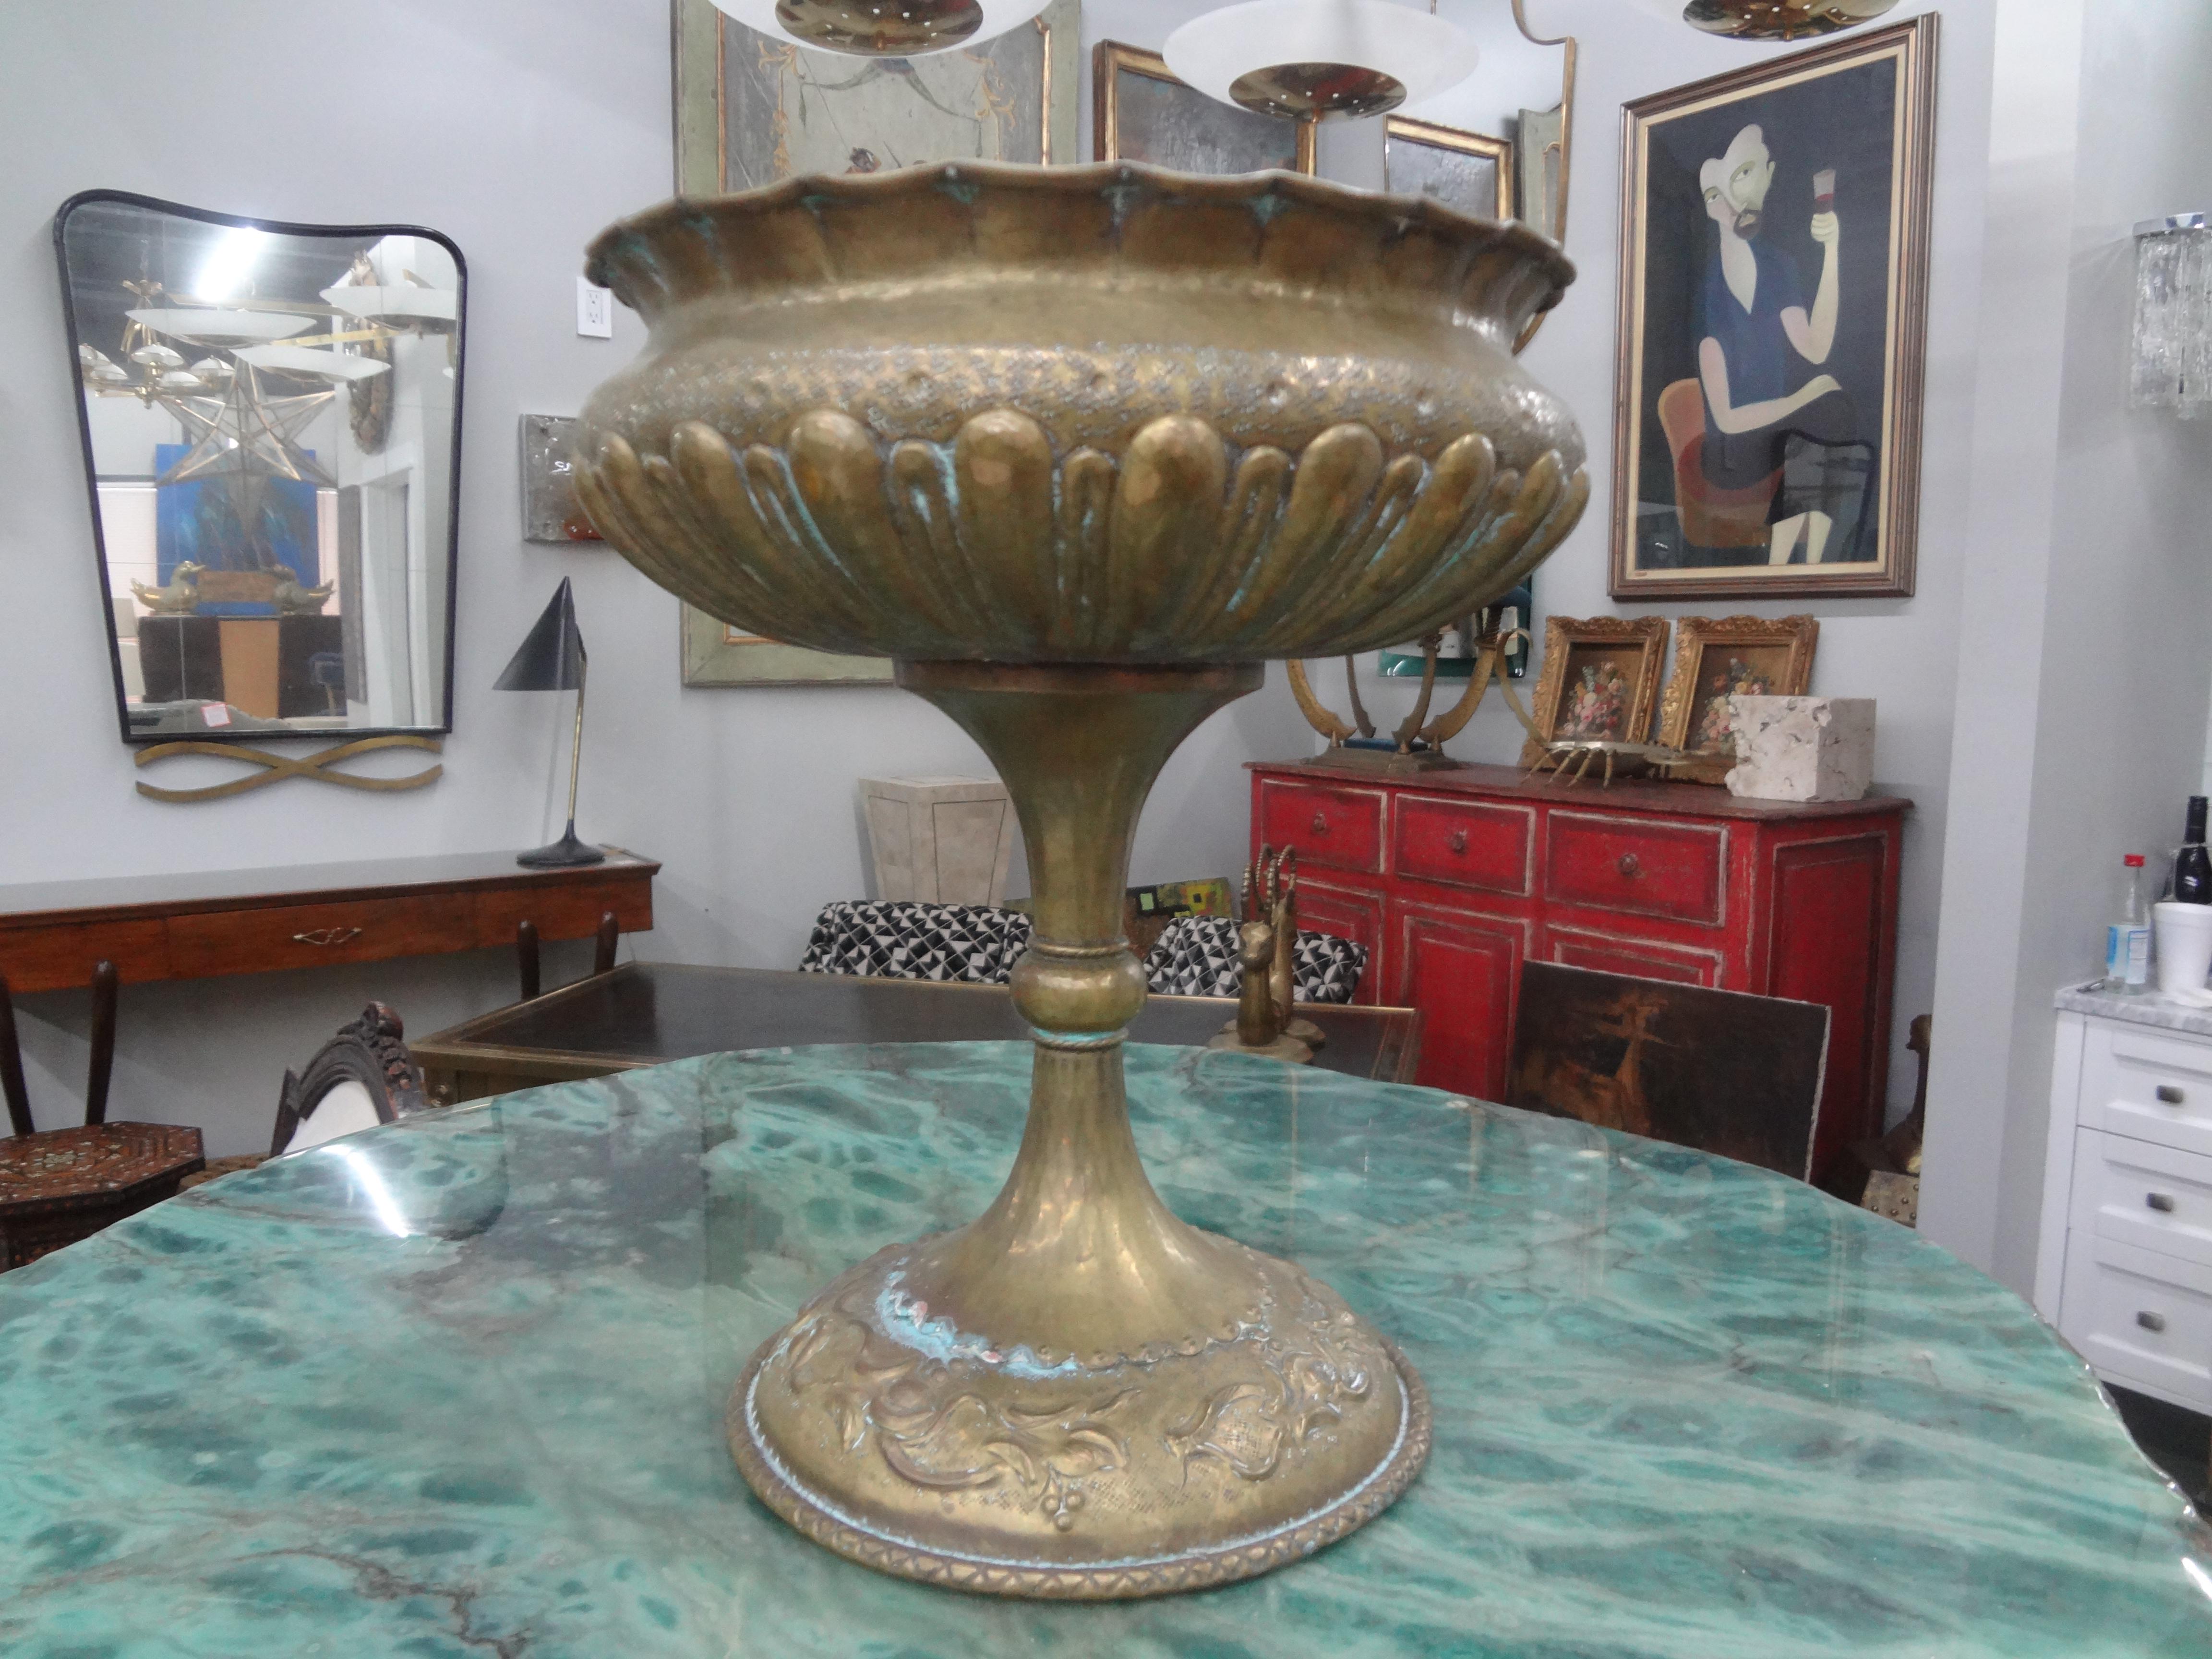 Italian Hammered Brass Urn Or Vessel.
Stunning Italian Art Deco hammered brass urn or vessel.
We have two other similar urns offered on 1stdibs.
To see all our offerings on 1stdibs, we are 
Kirby Antiques
Houston, Texas